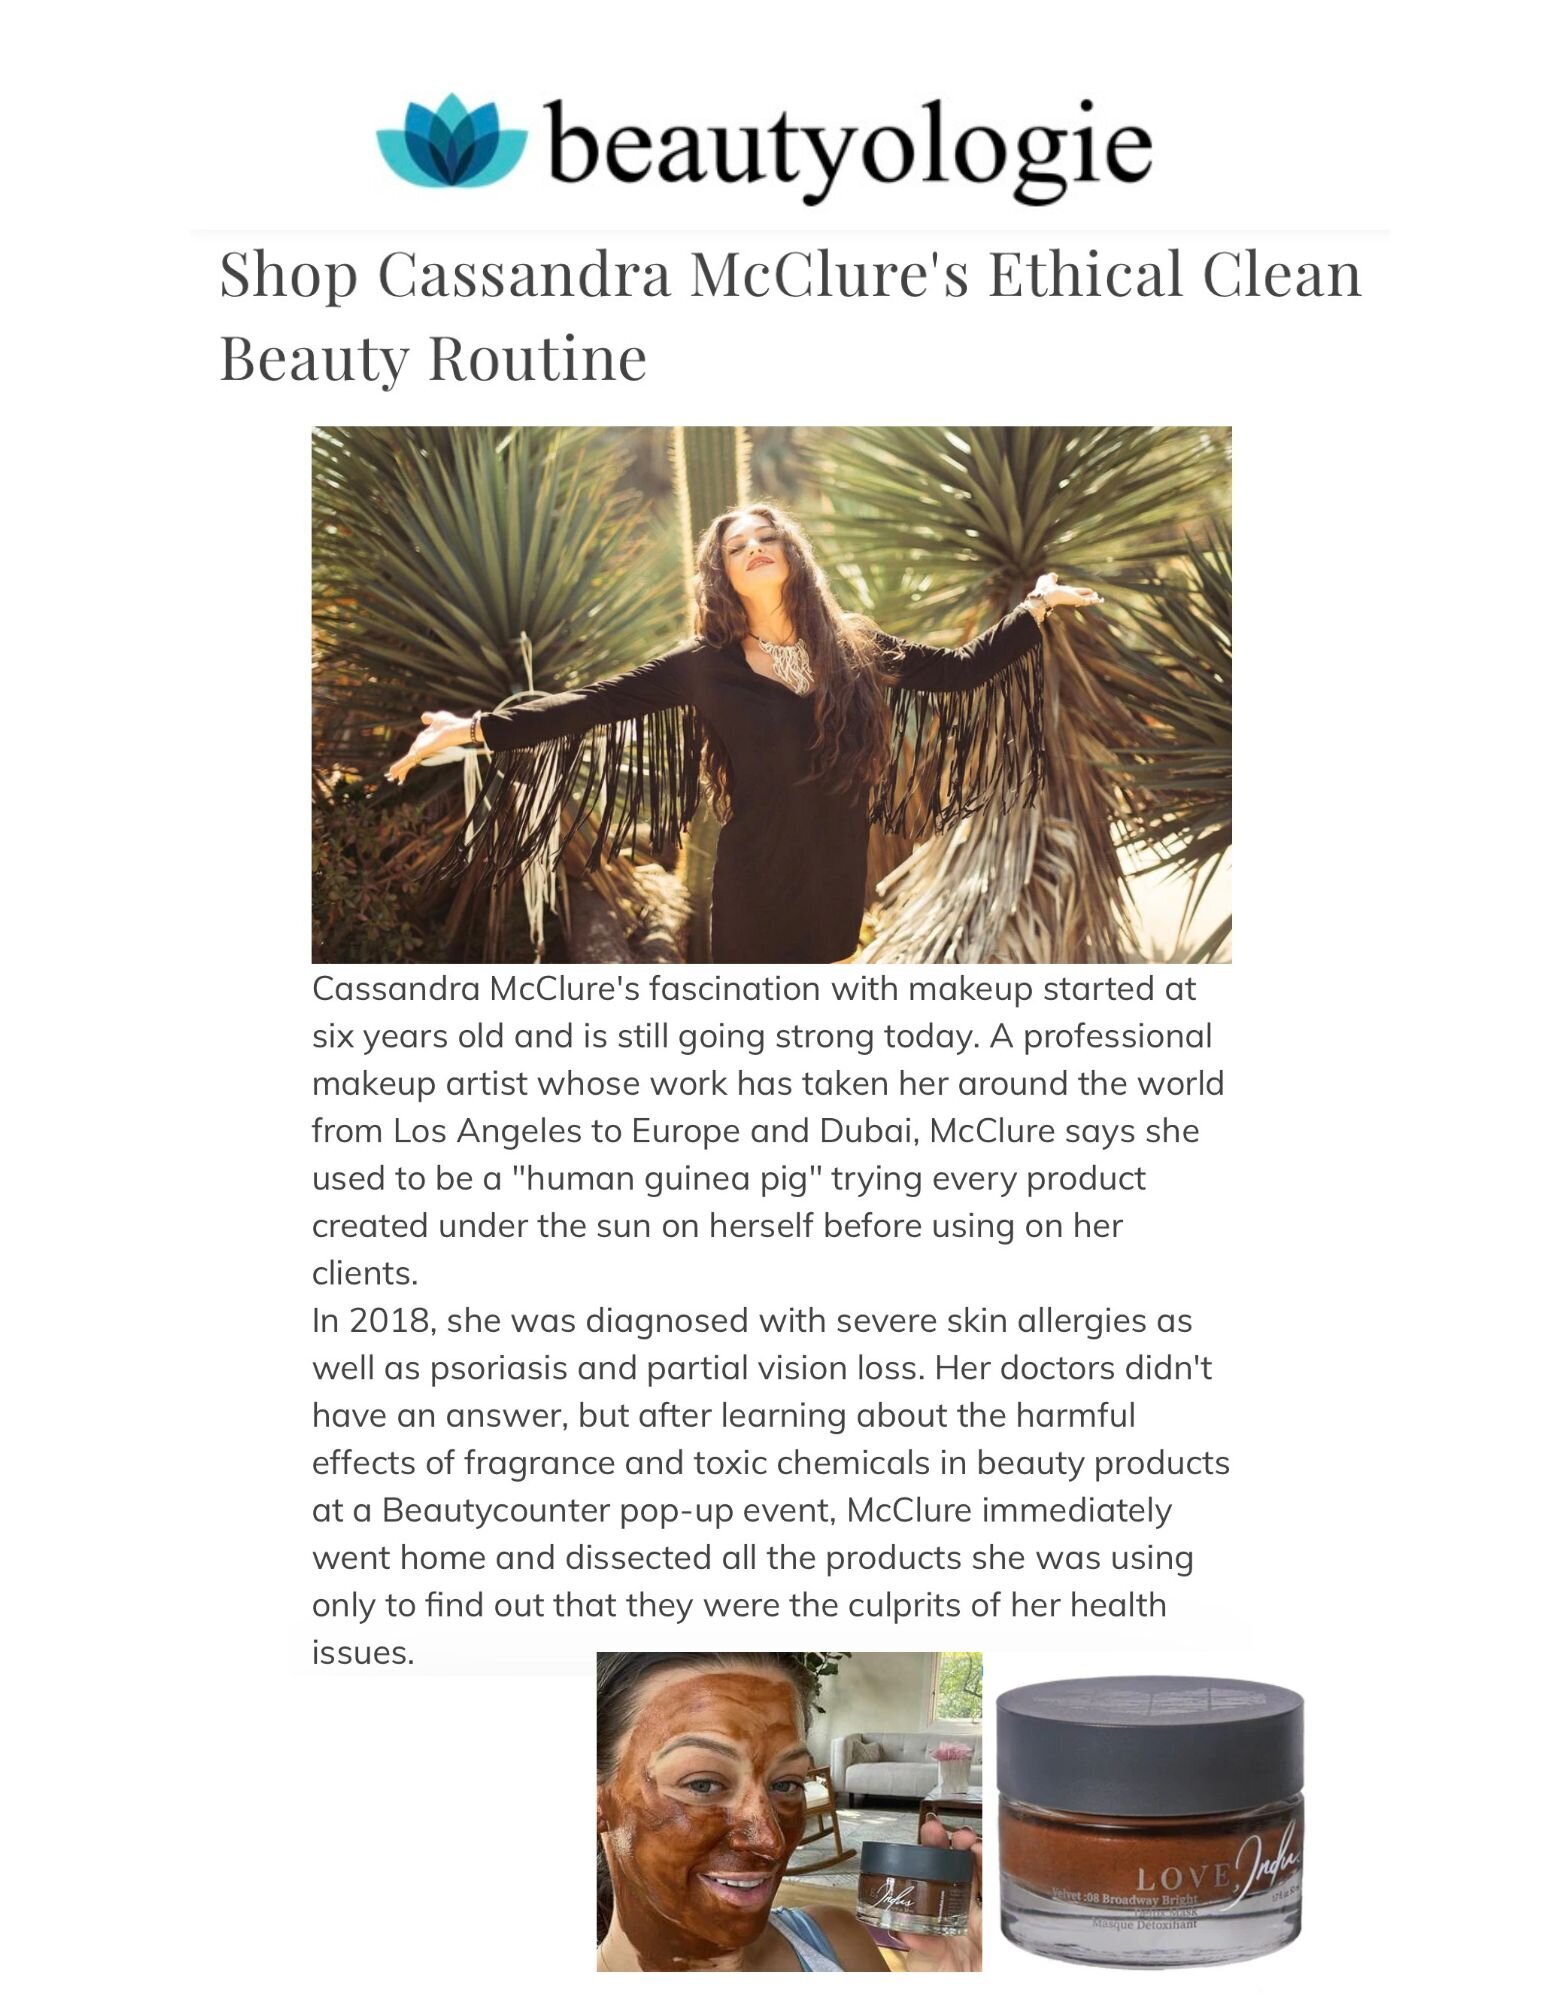 beautyologie article featuring Cassandra McClure on clean beauty routine